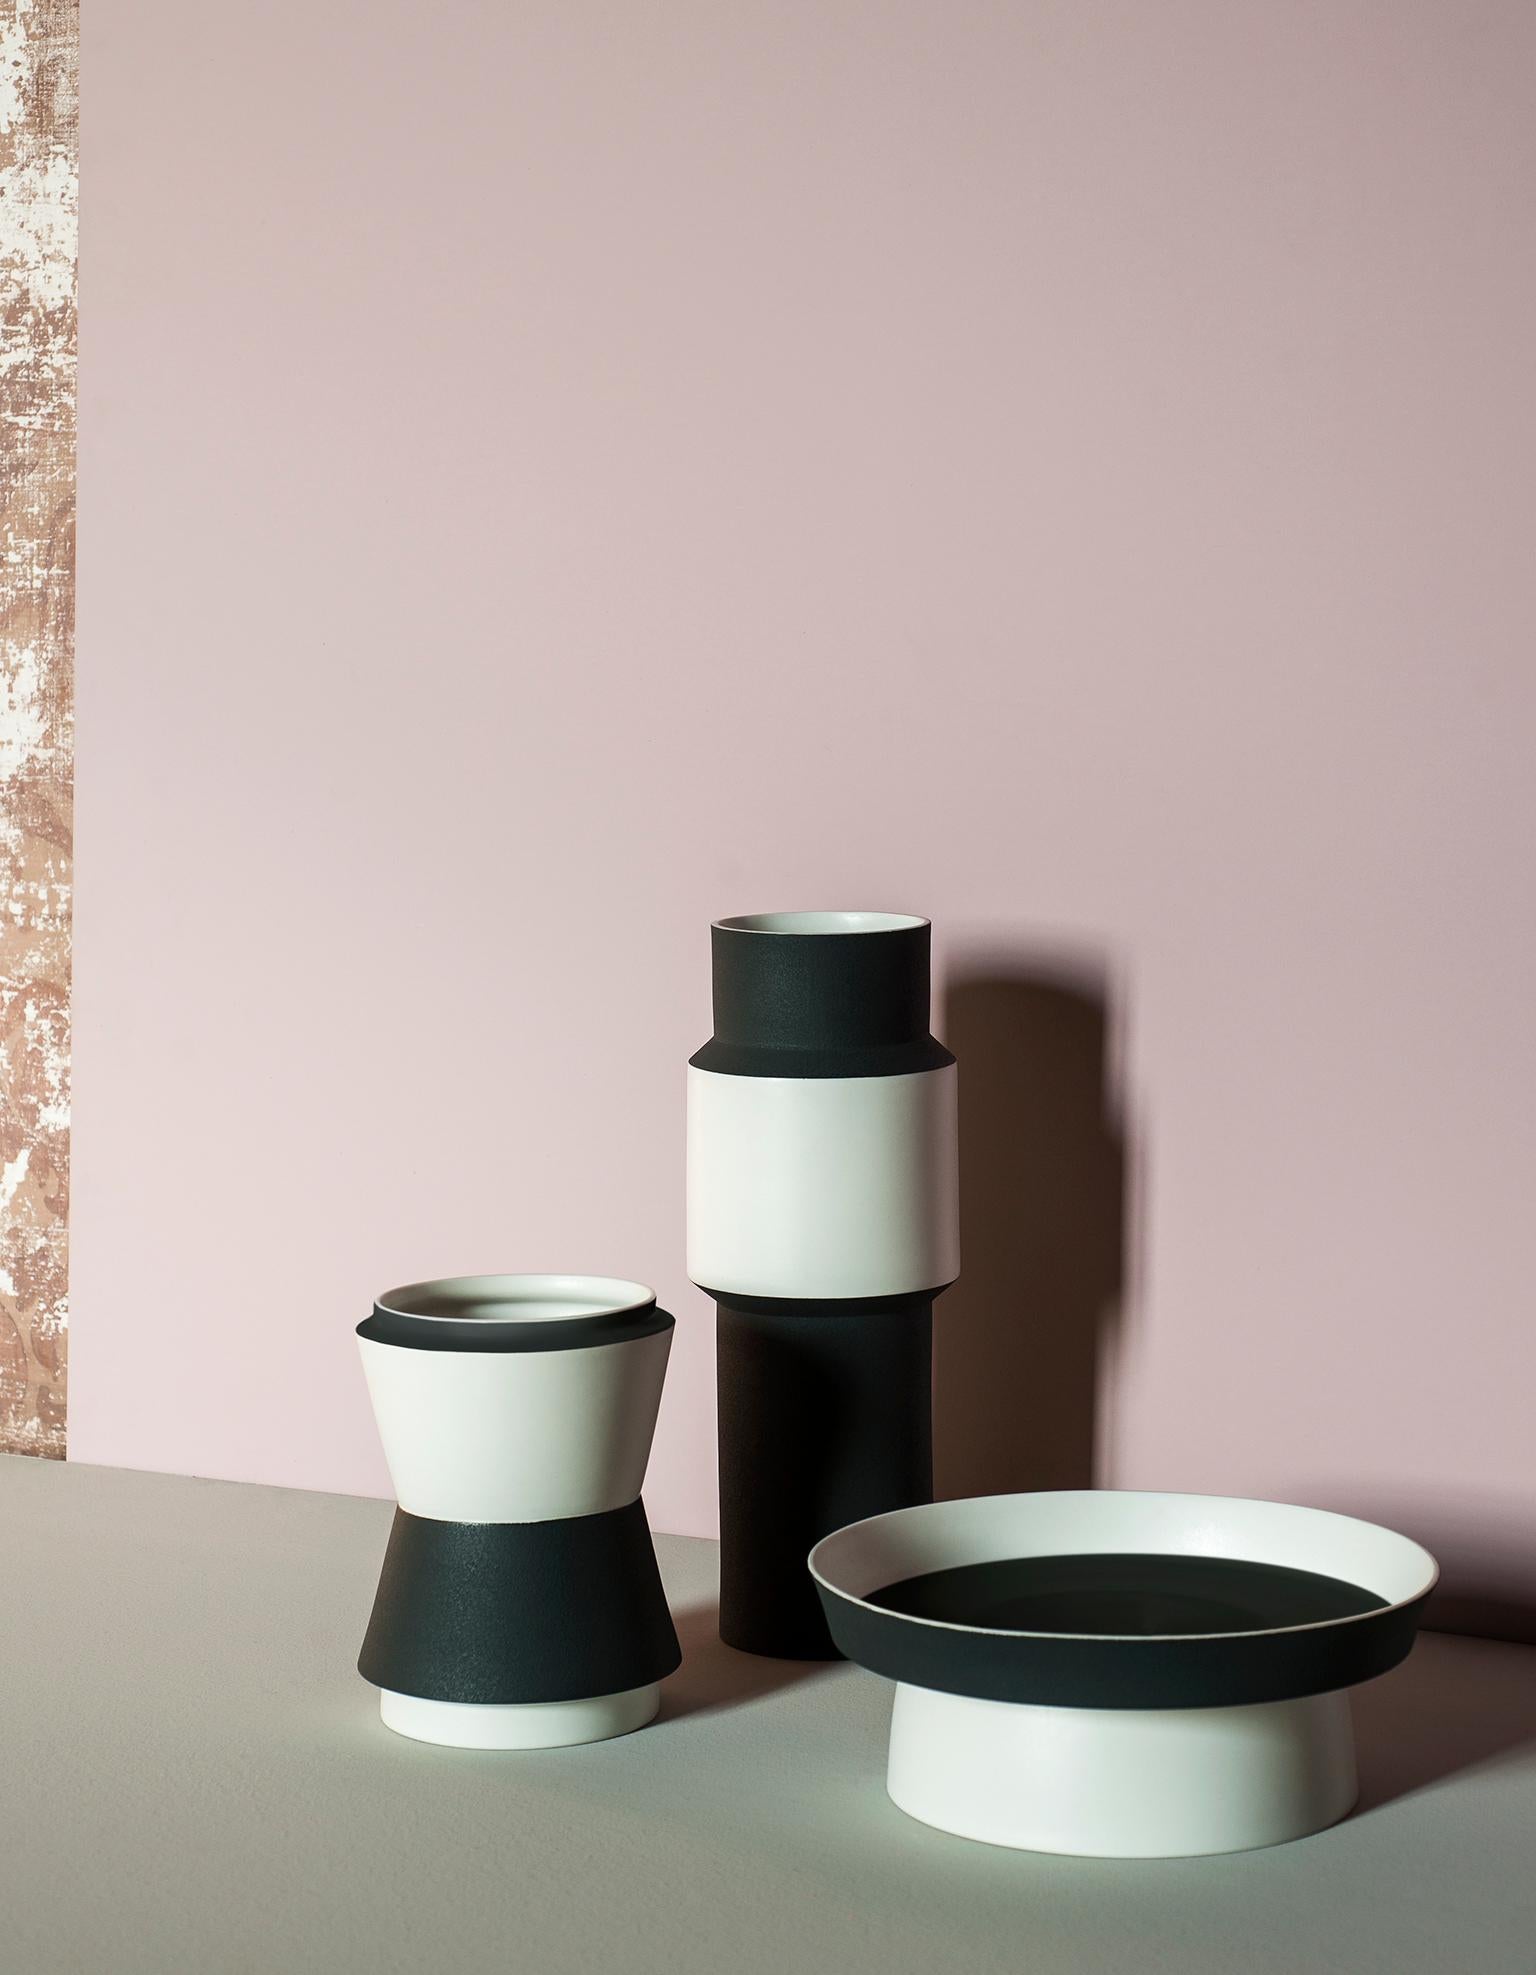 A shape and a material that represent classical, almost primordial elements of design objects: the porcelain pot. Maria Gabriella Zecca’s Vasum design arose by developing and overlaying elementary geometrical shapes: each portion features a colour,